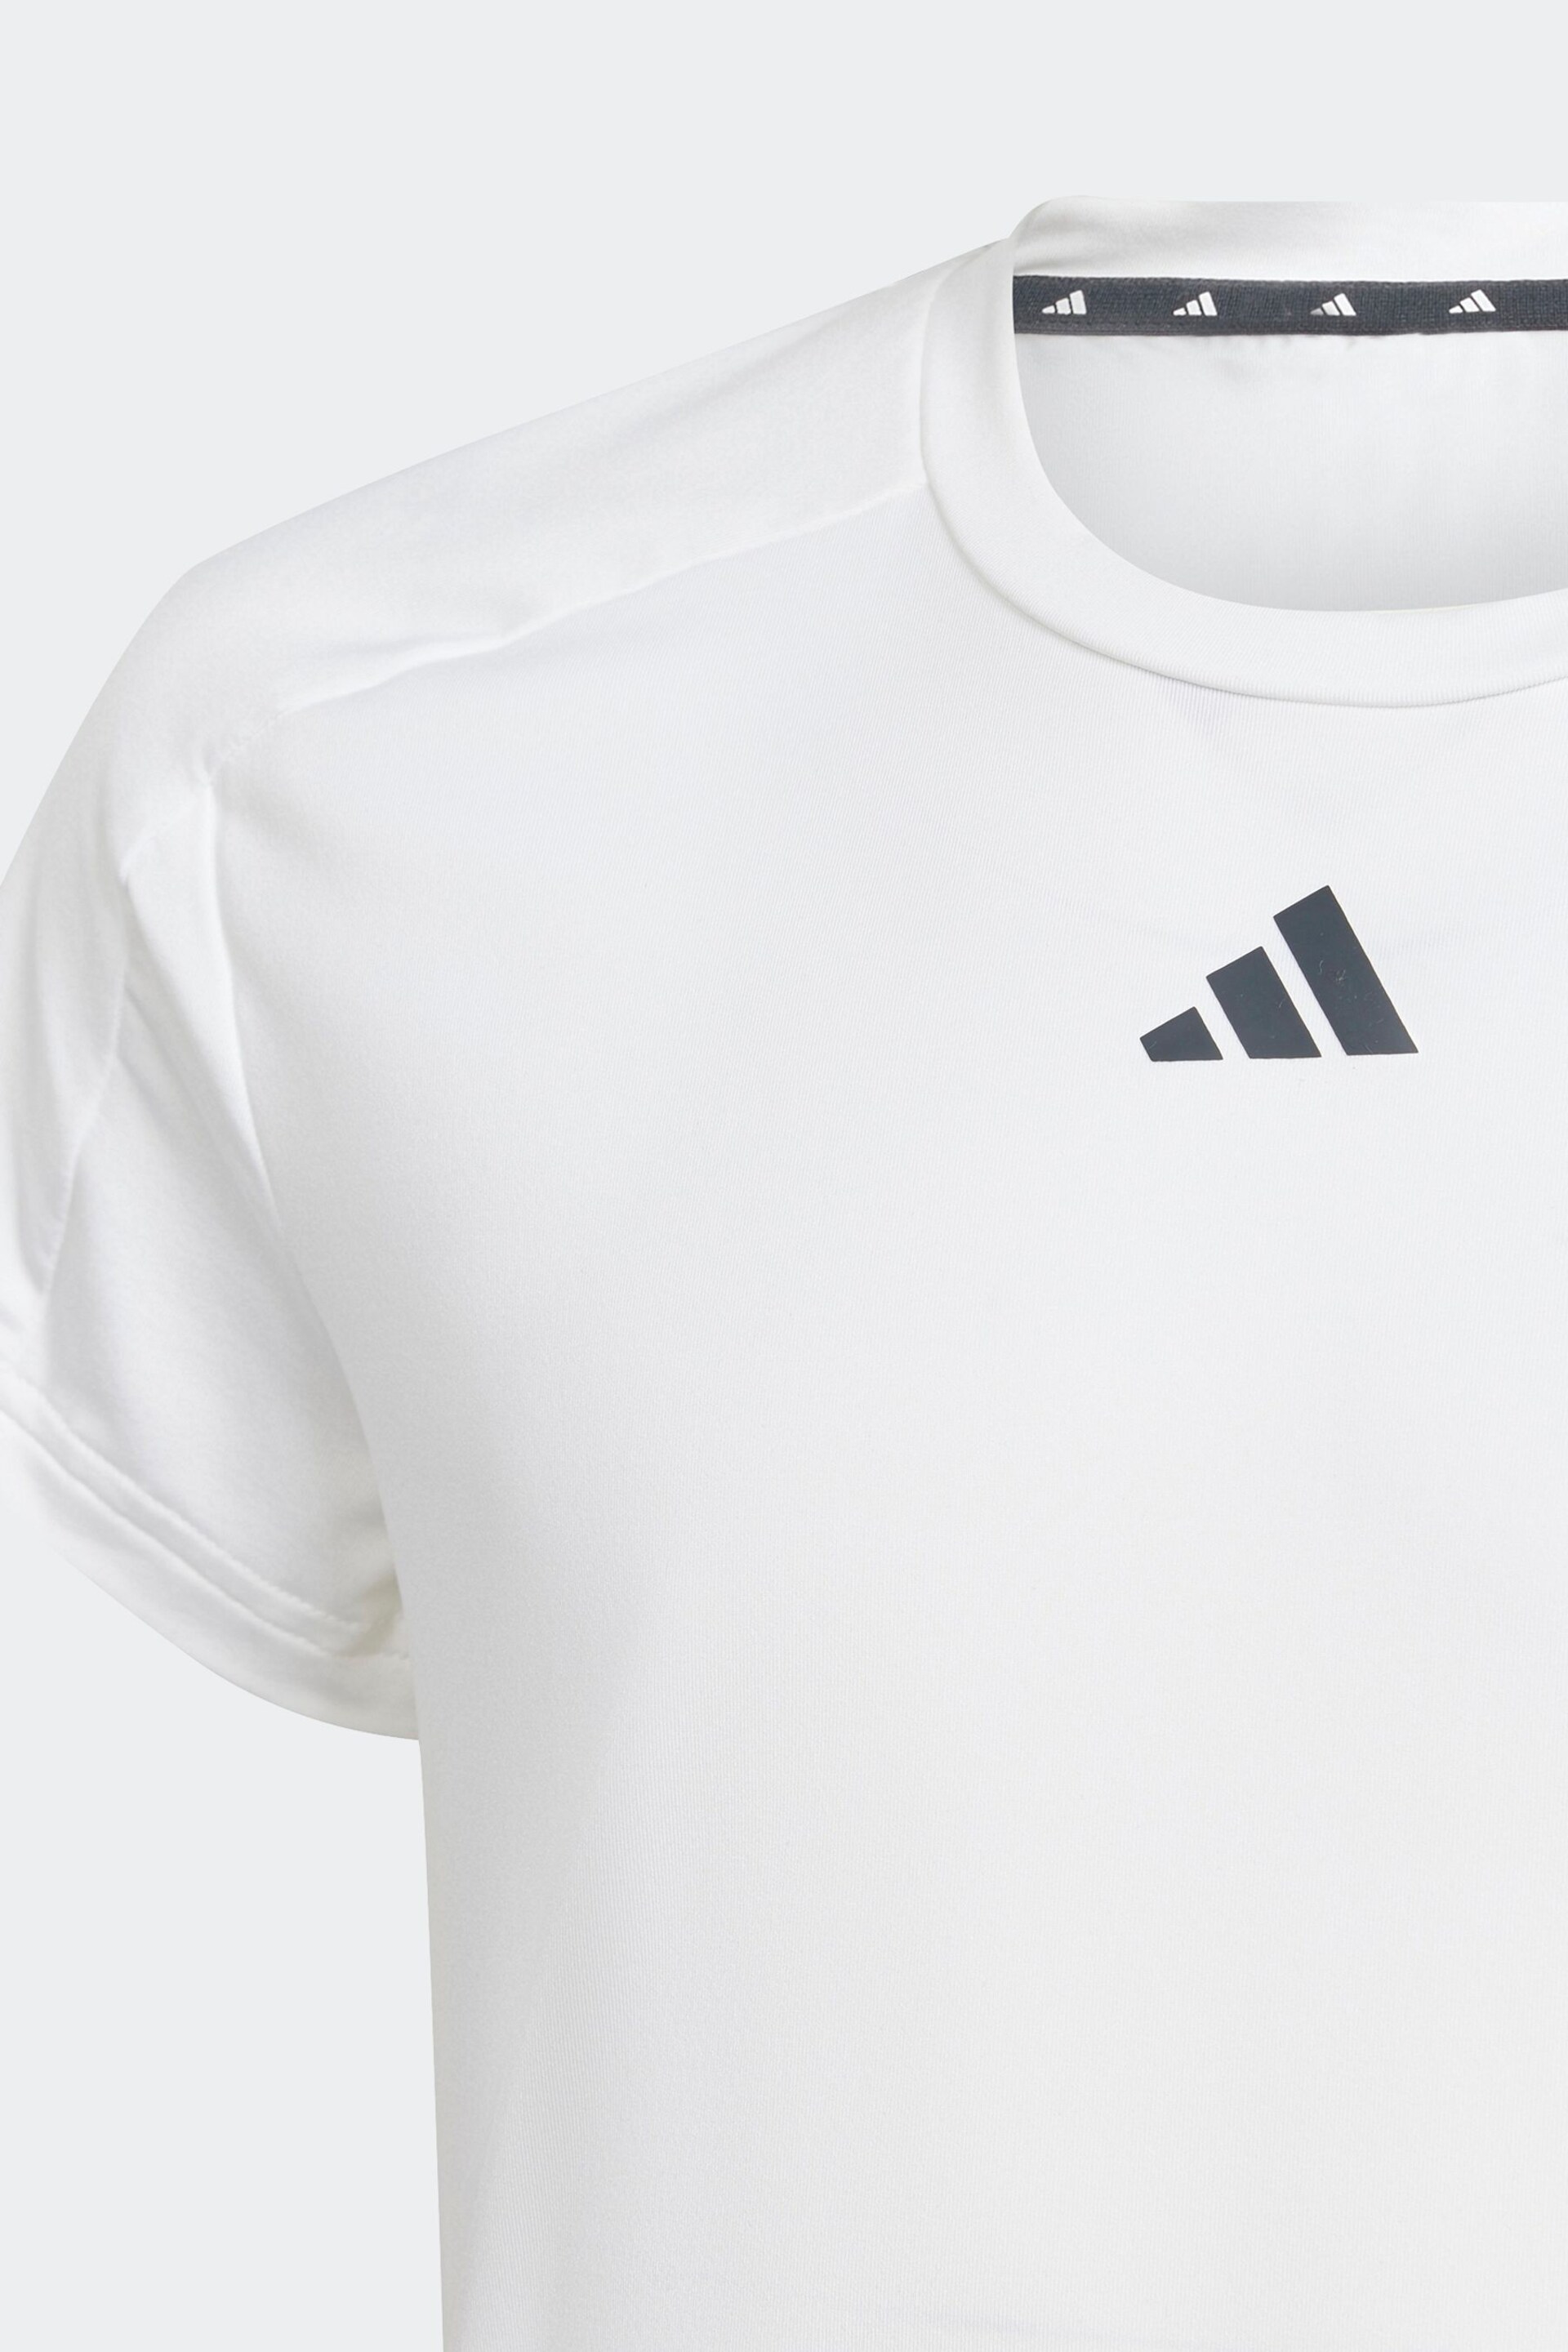 adidas White Kids Train Essentials T-Shirt and Shorts Set - Image 9 of 13